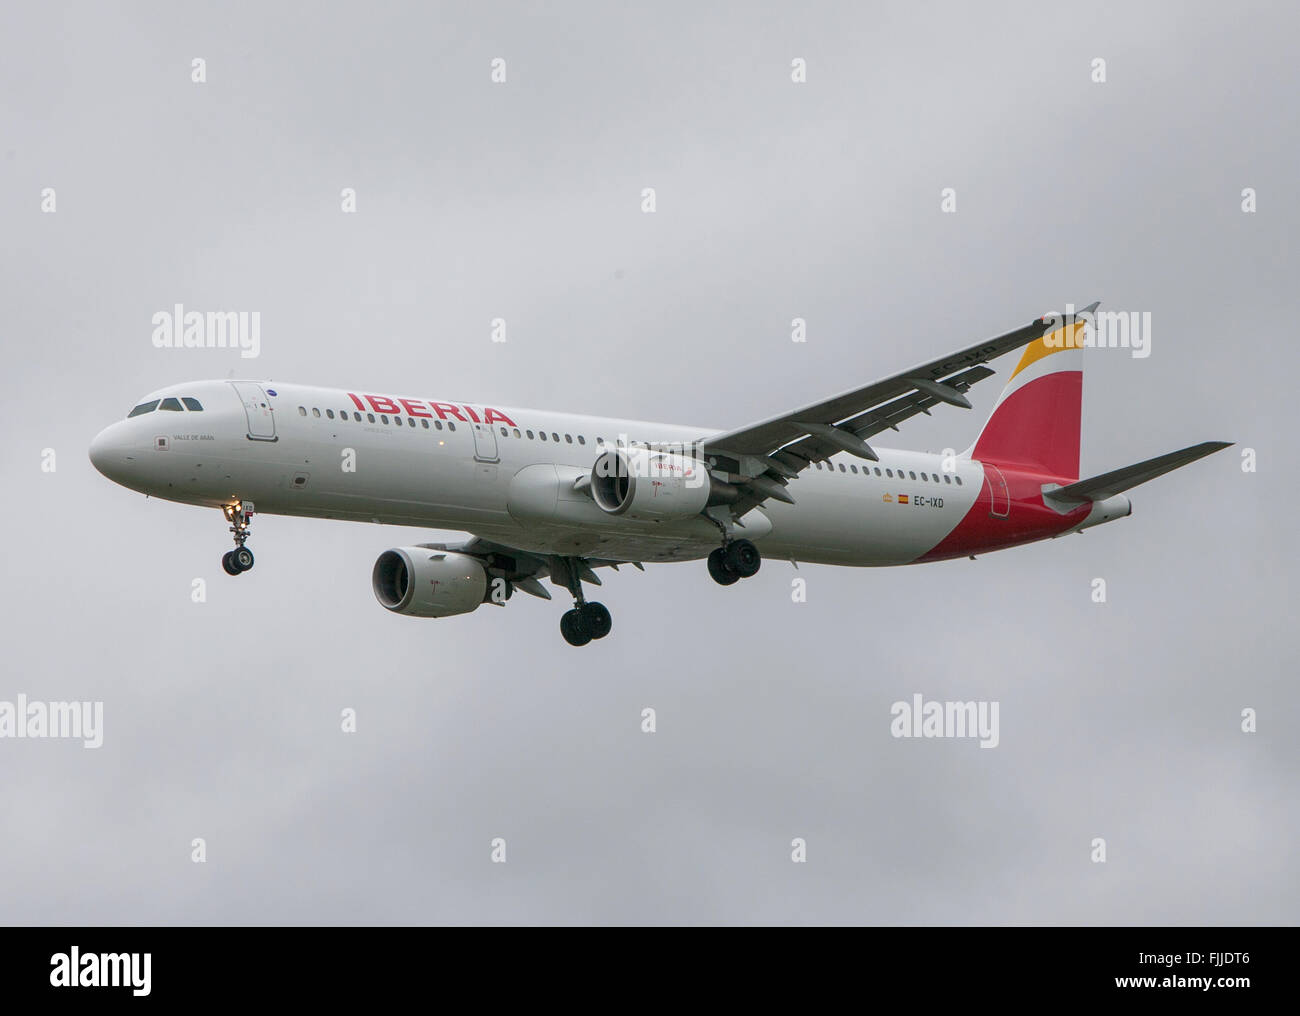 Airbus A321 of Iberia Airlines landing at LHR London Heathrow Airport Stock Photo